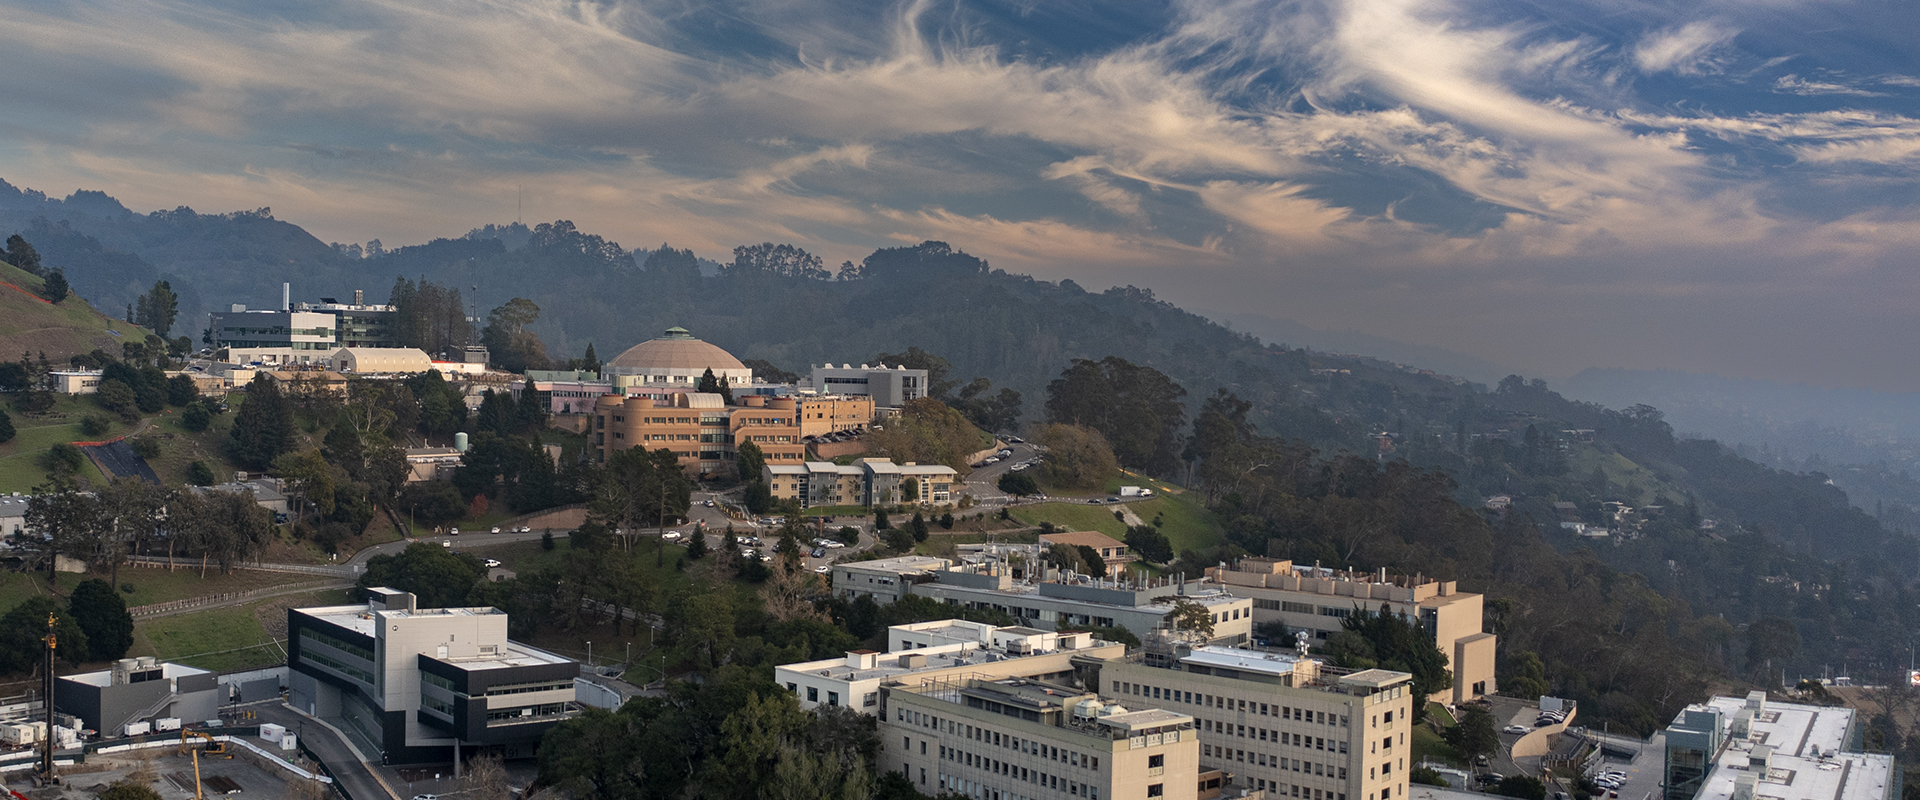 Aerial view of Berkeley Lab with hills, haze and clouds in the background